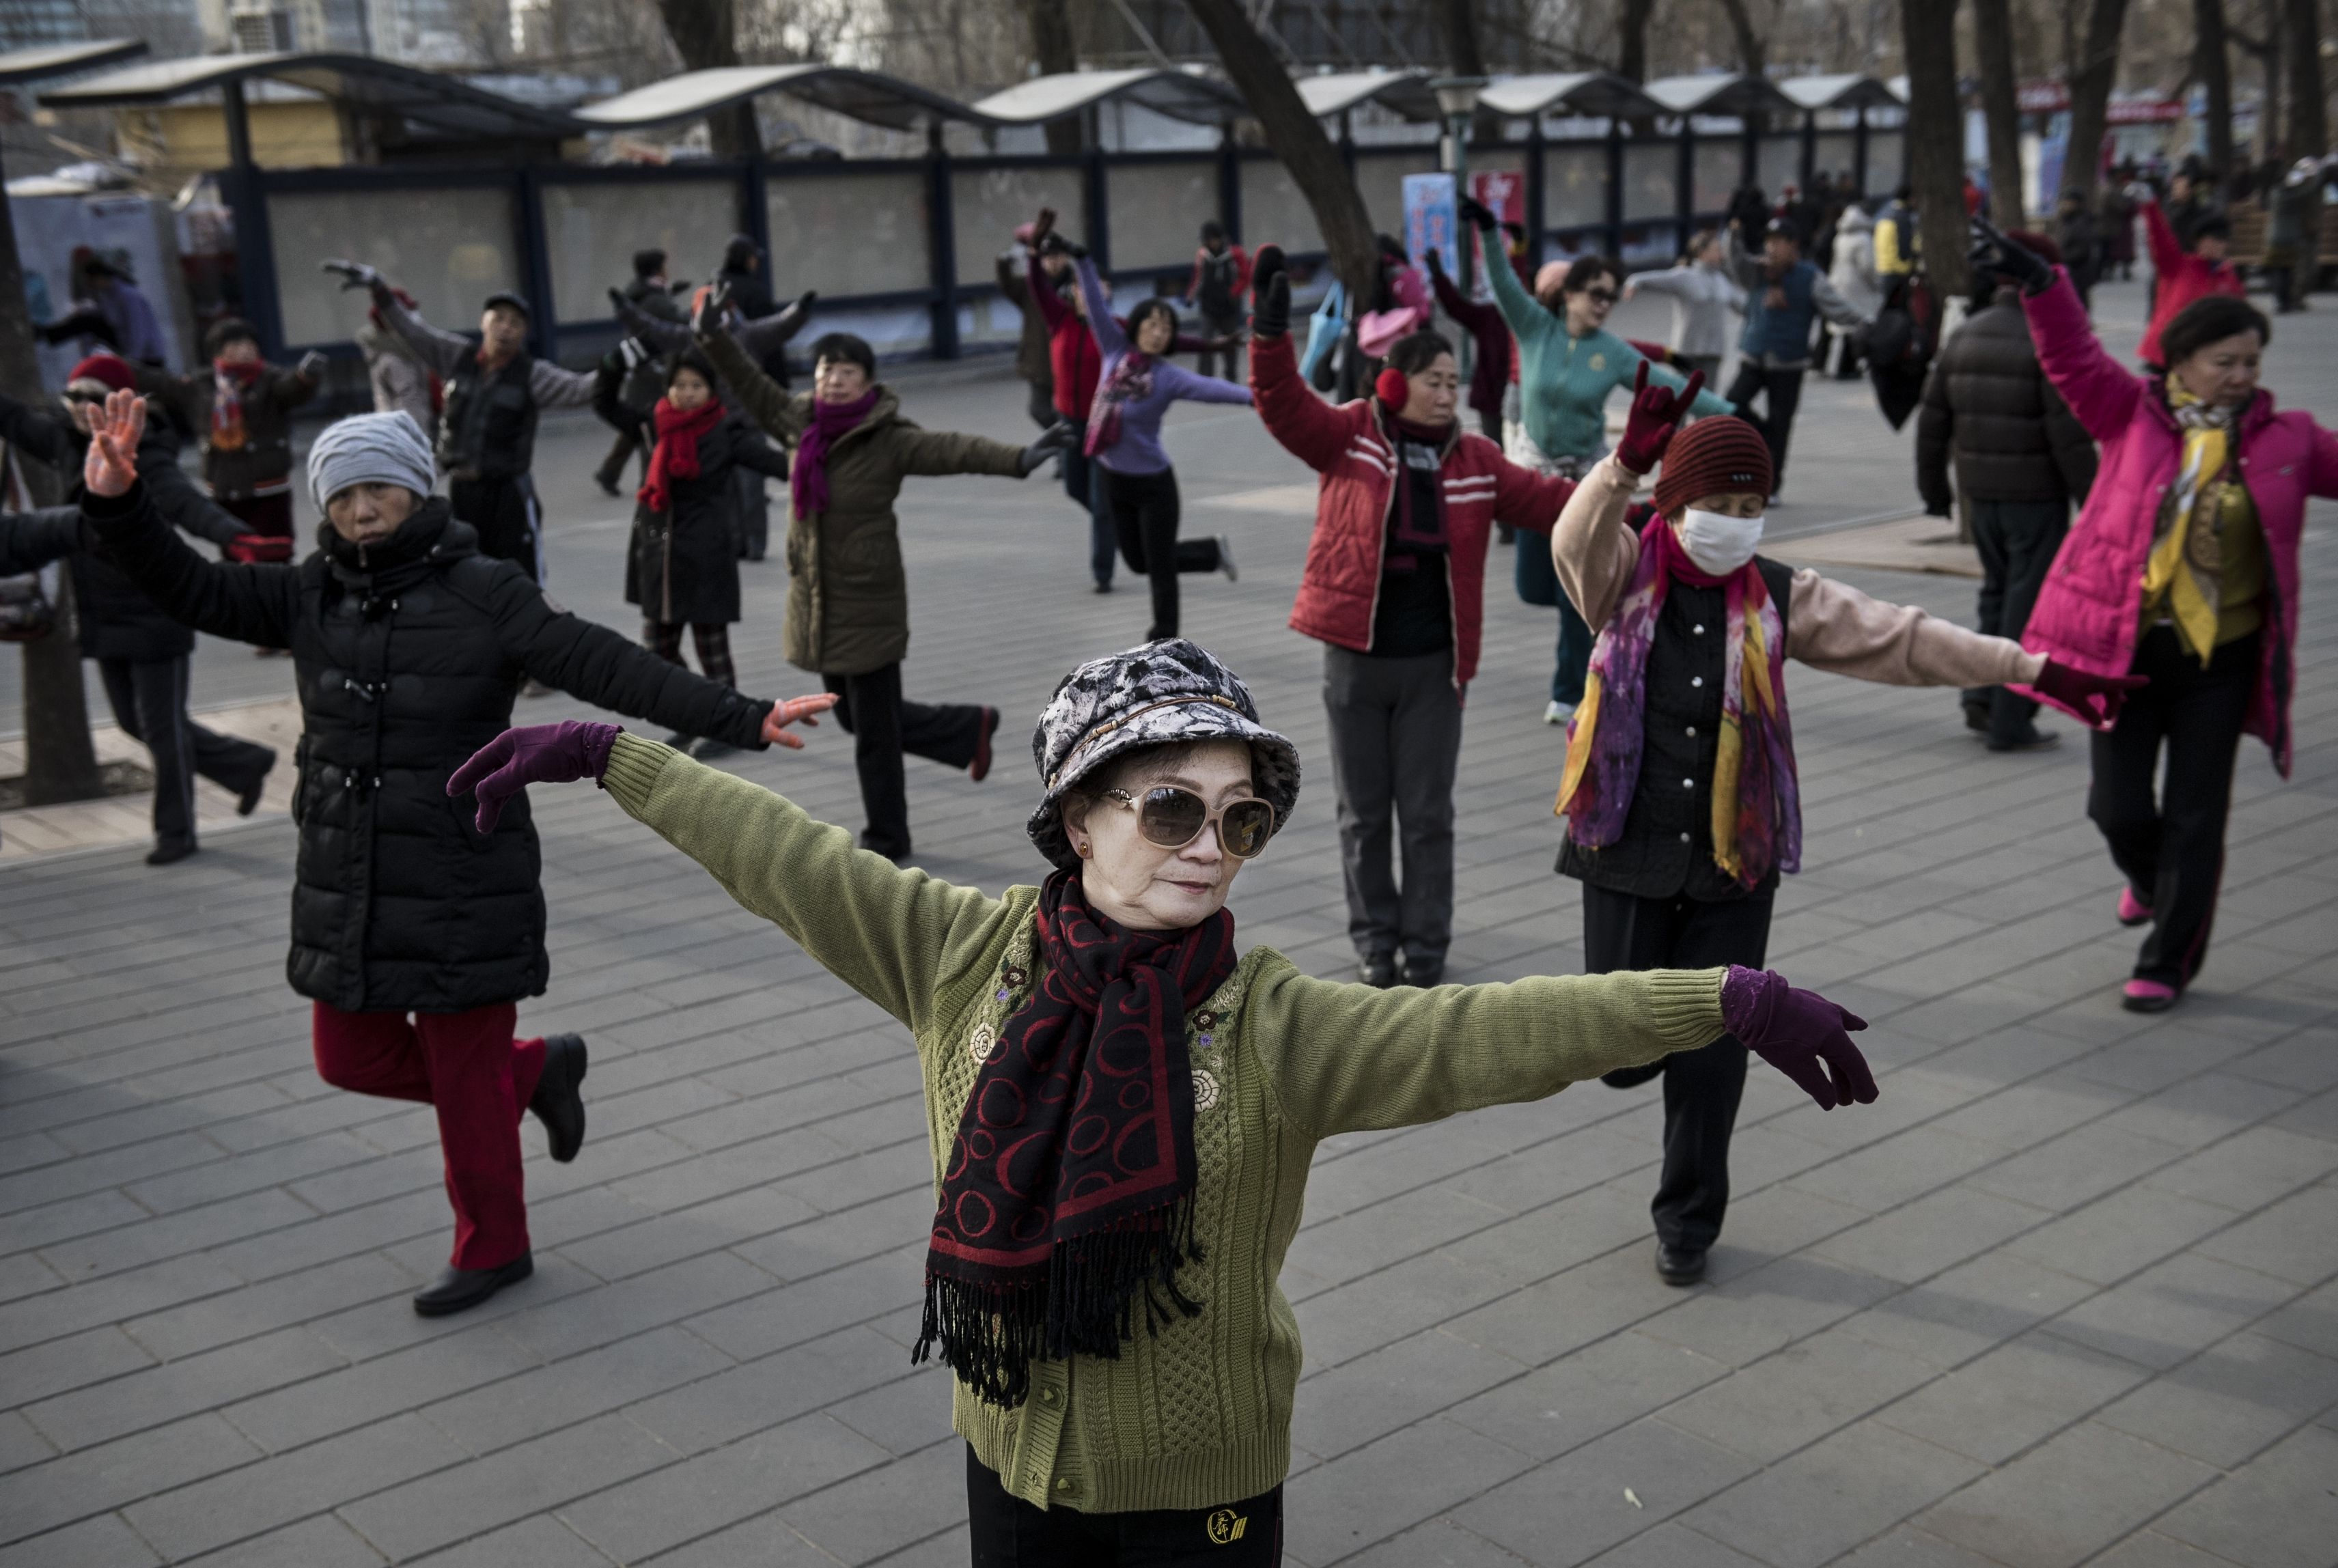 Dancing grannies gang: New problem for Chinese locals